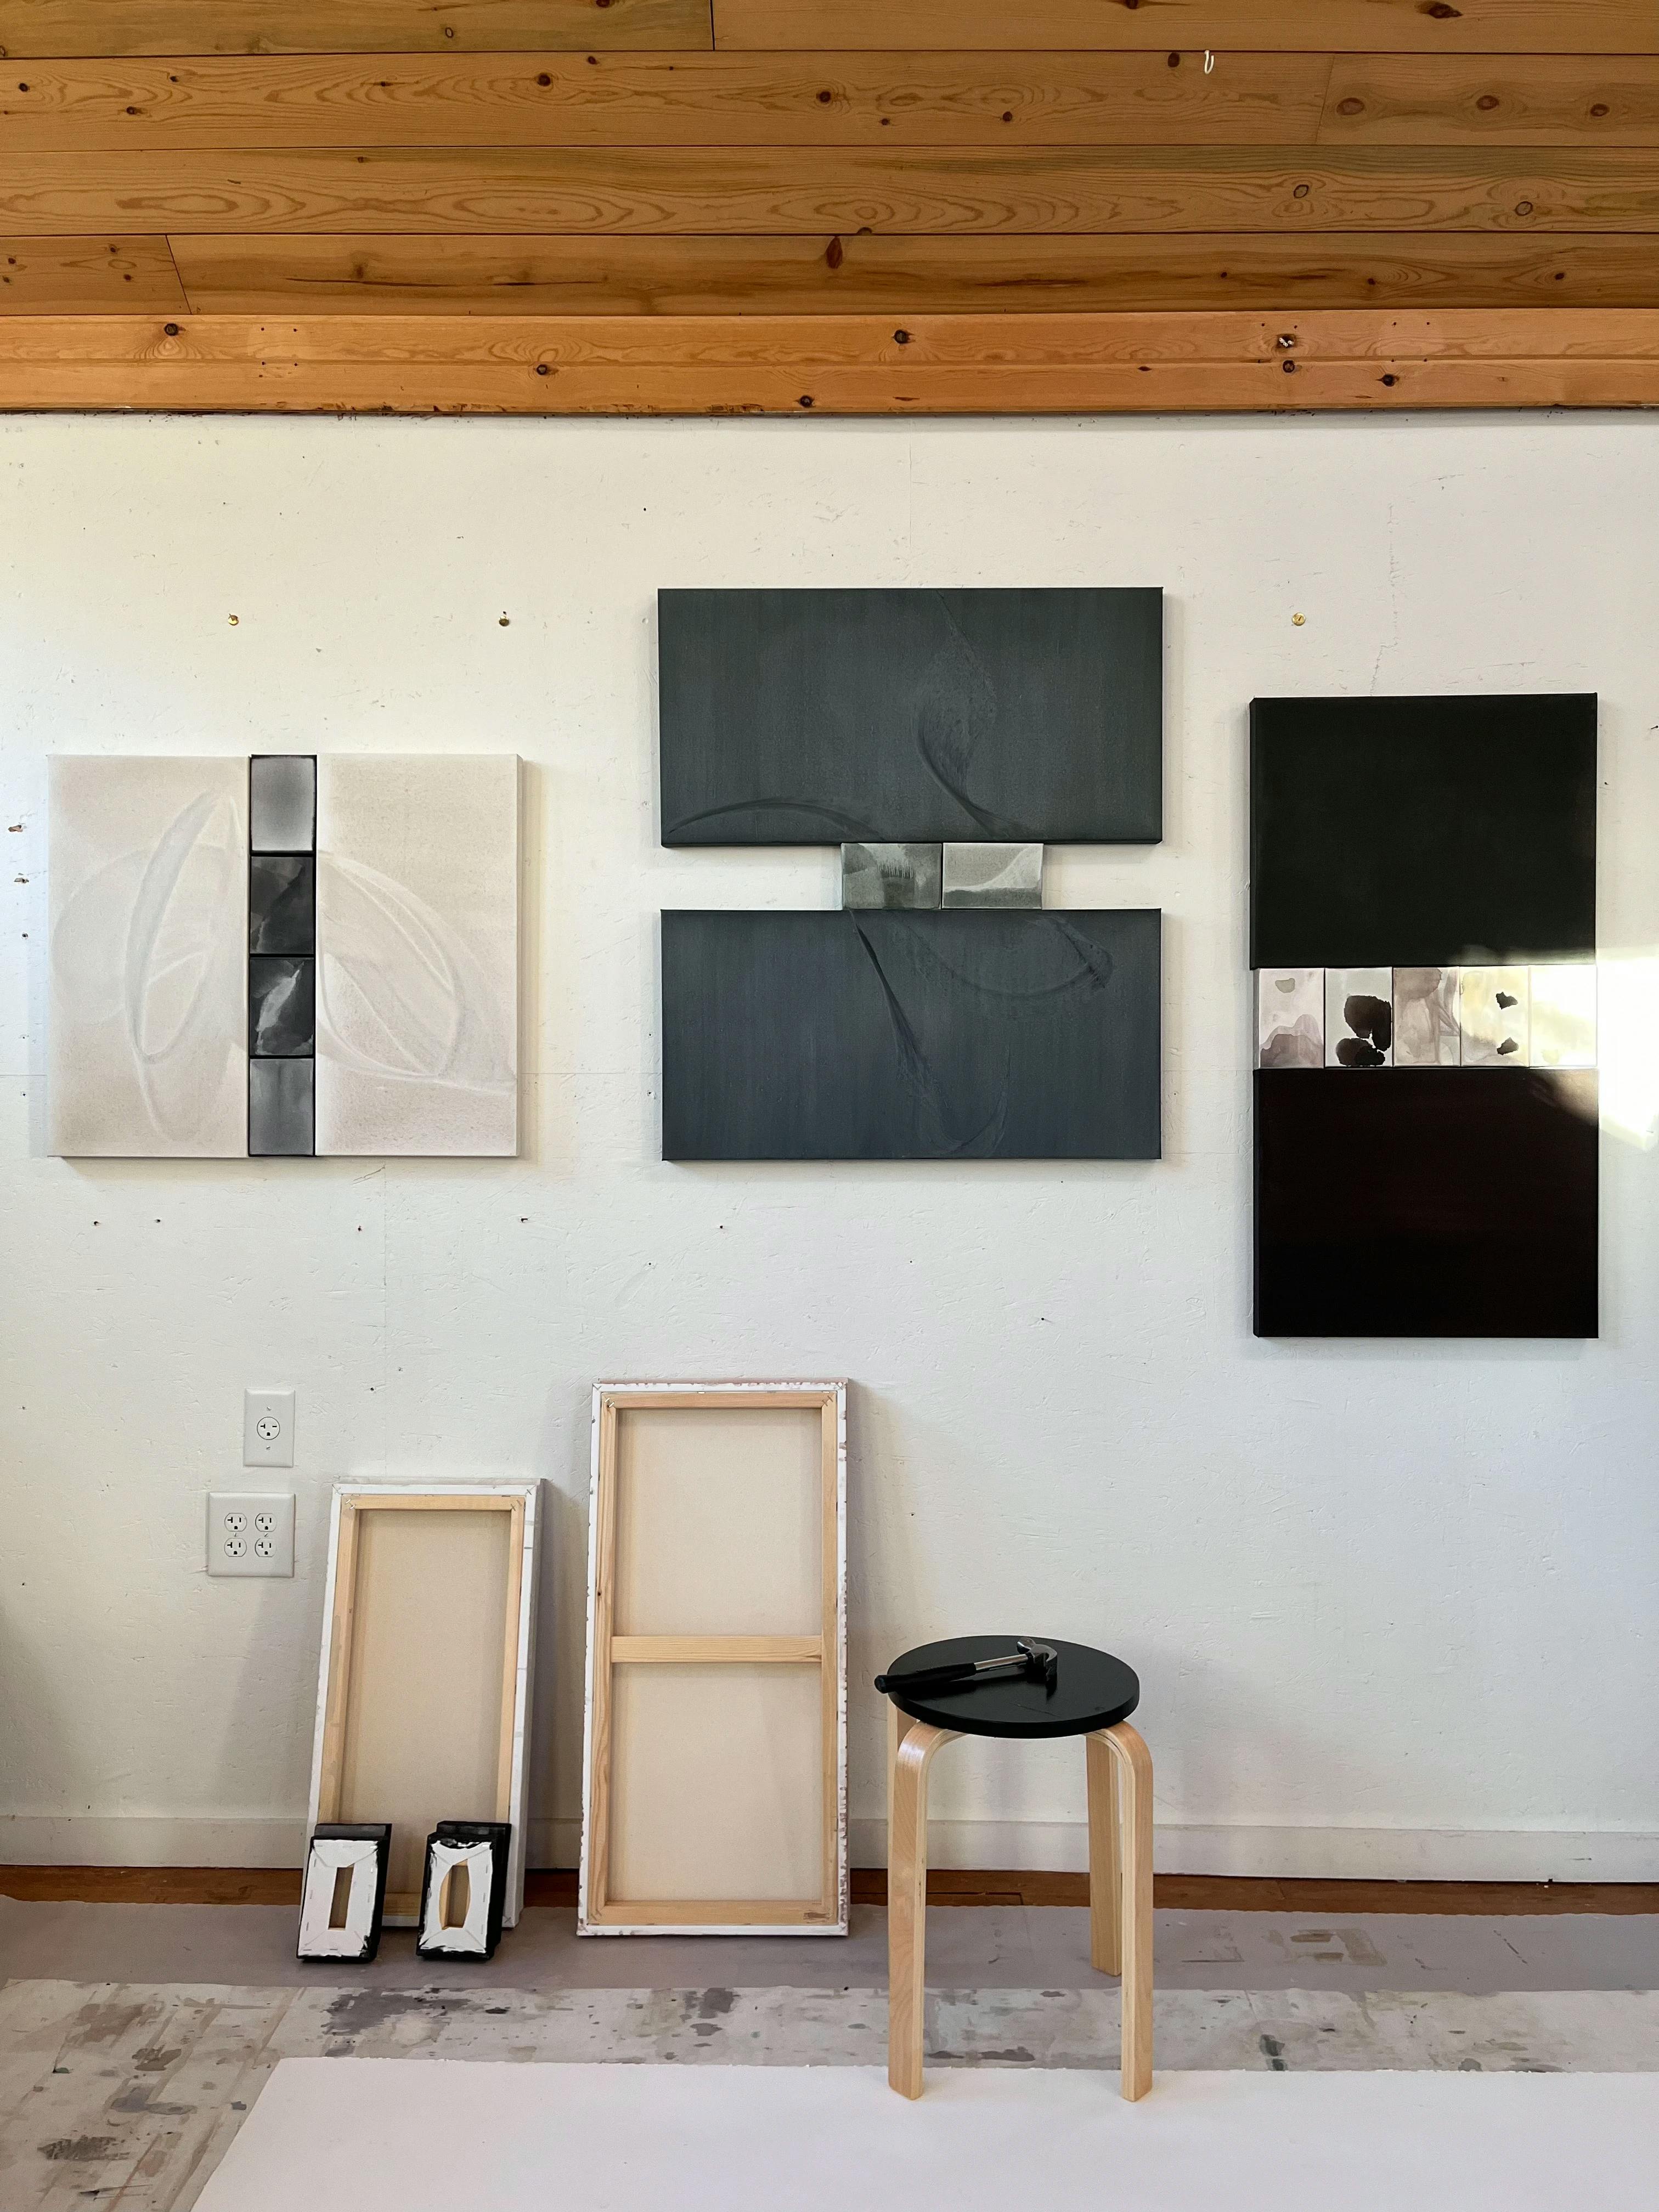 Black and gray diptychs by artist Laura Naples installed on a white wall in her studio above a black wooden stool.